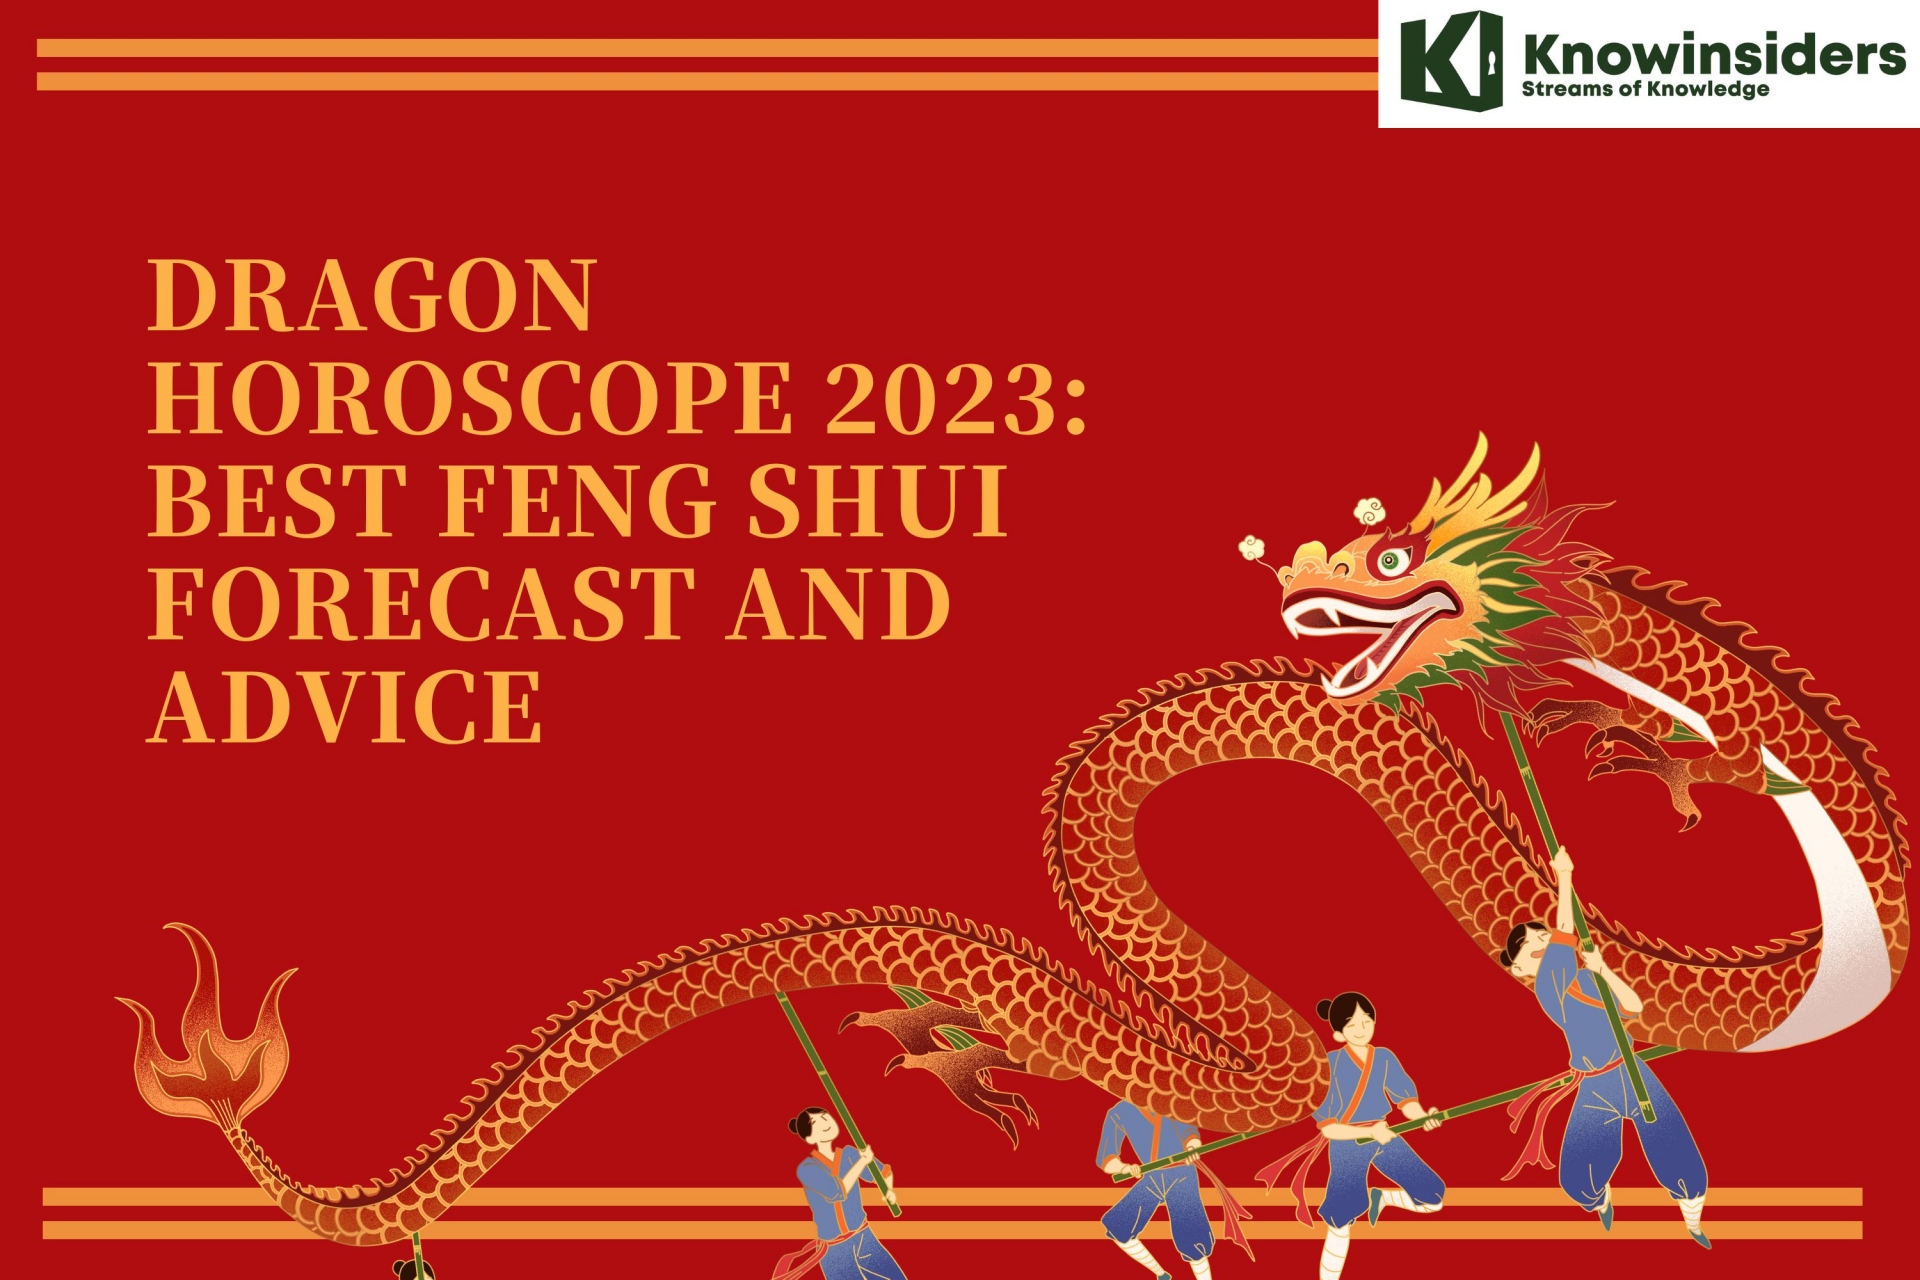 DRAGON Horoscope 2023: Best Feng Shui Forecast and Advice